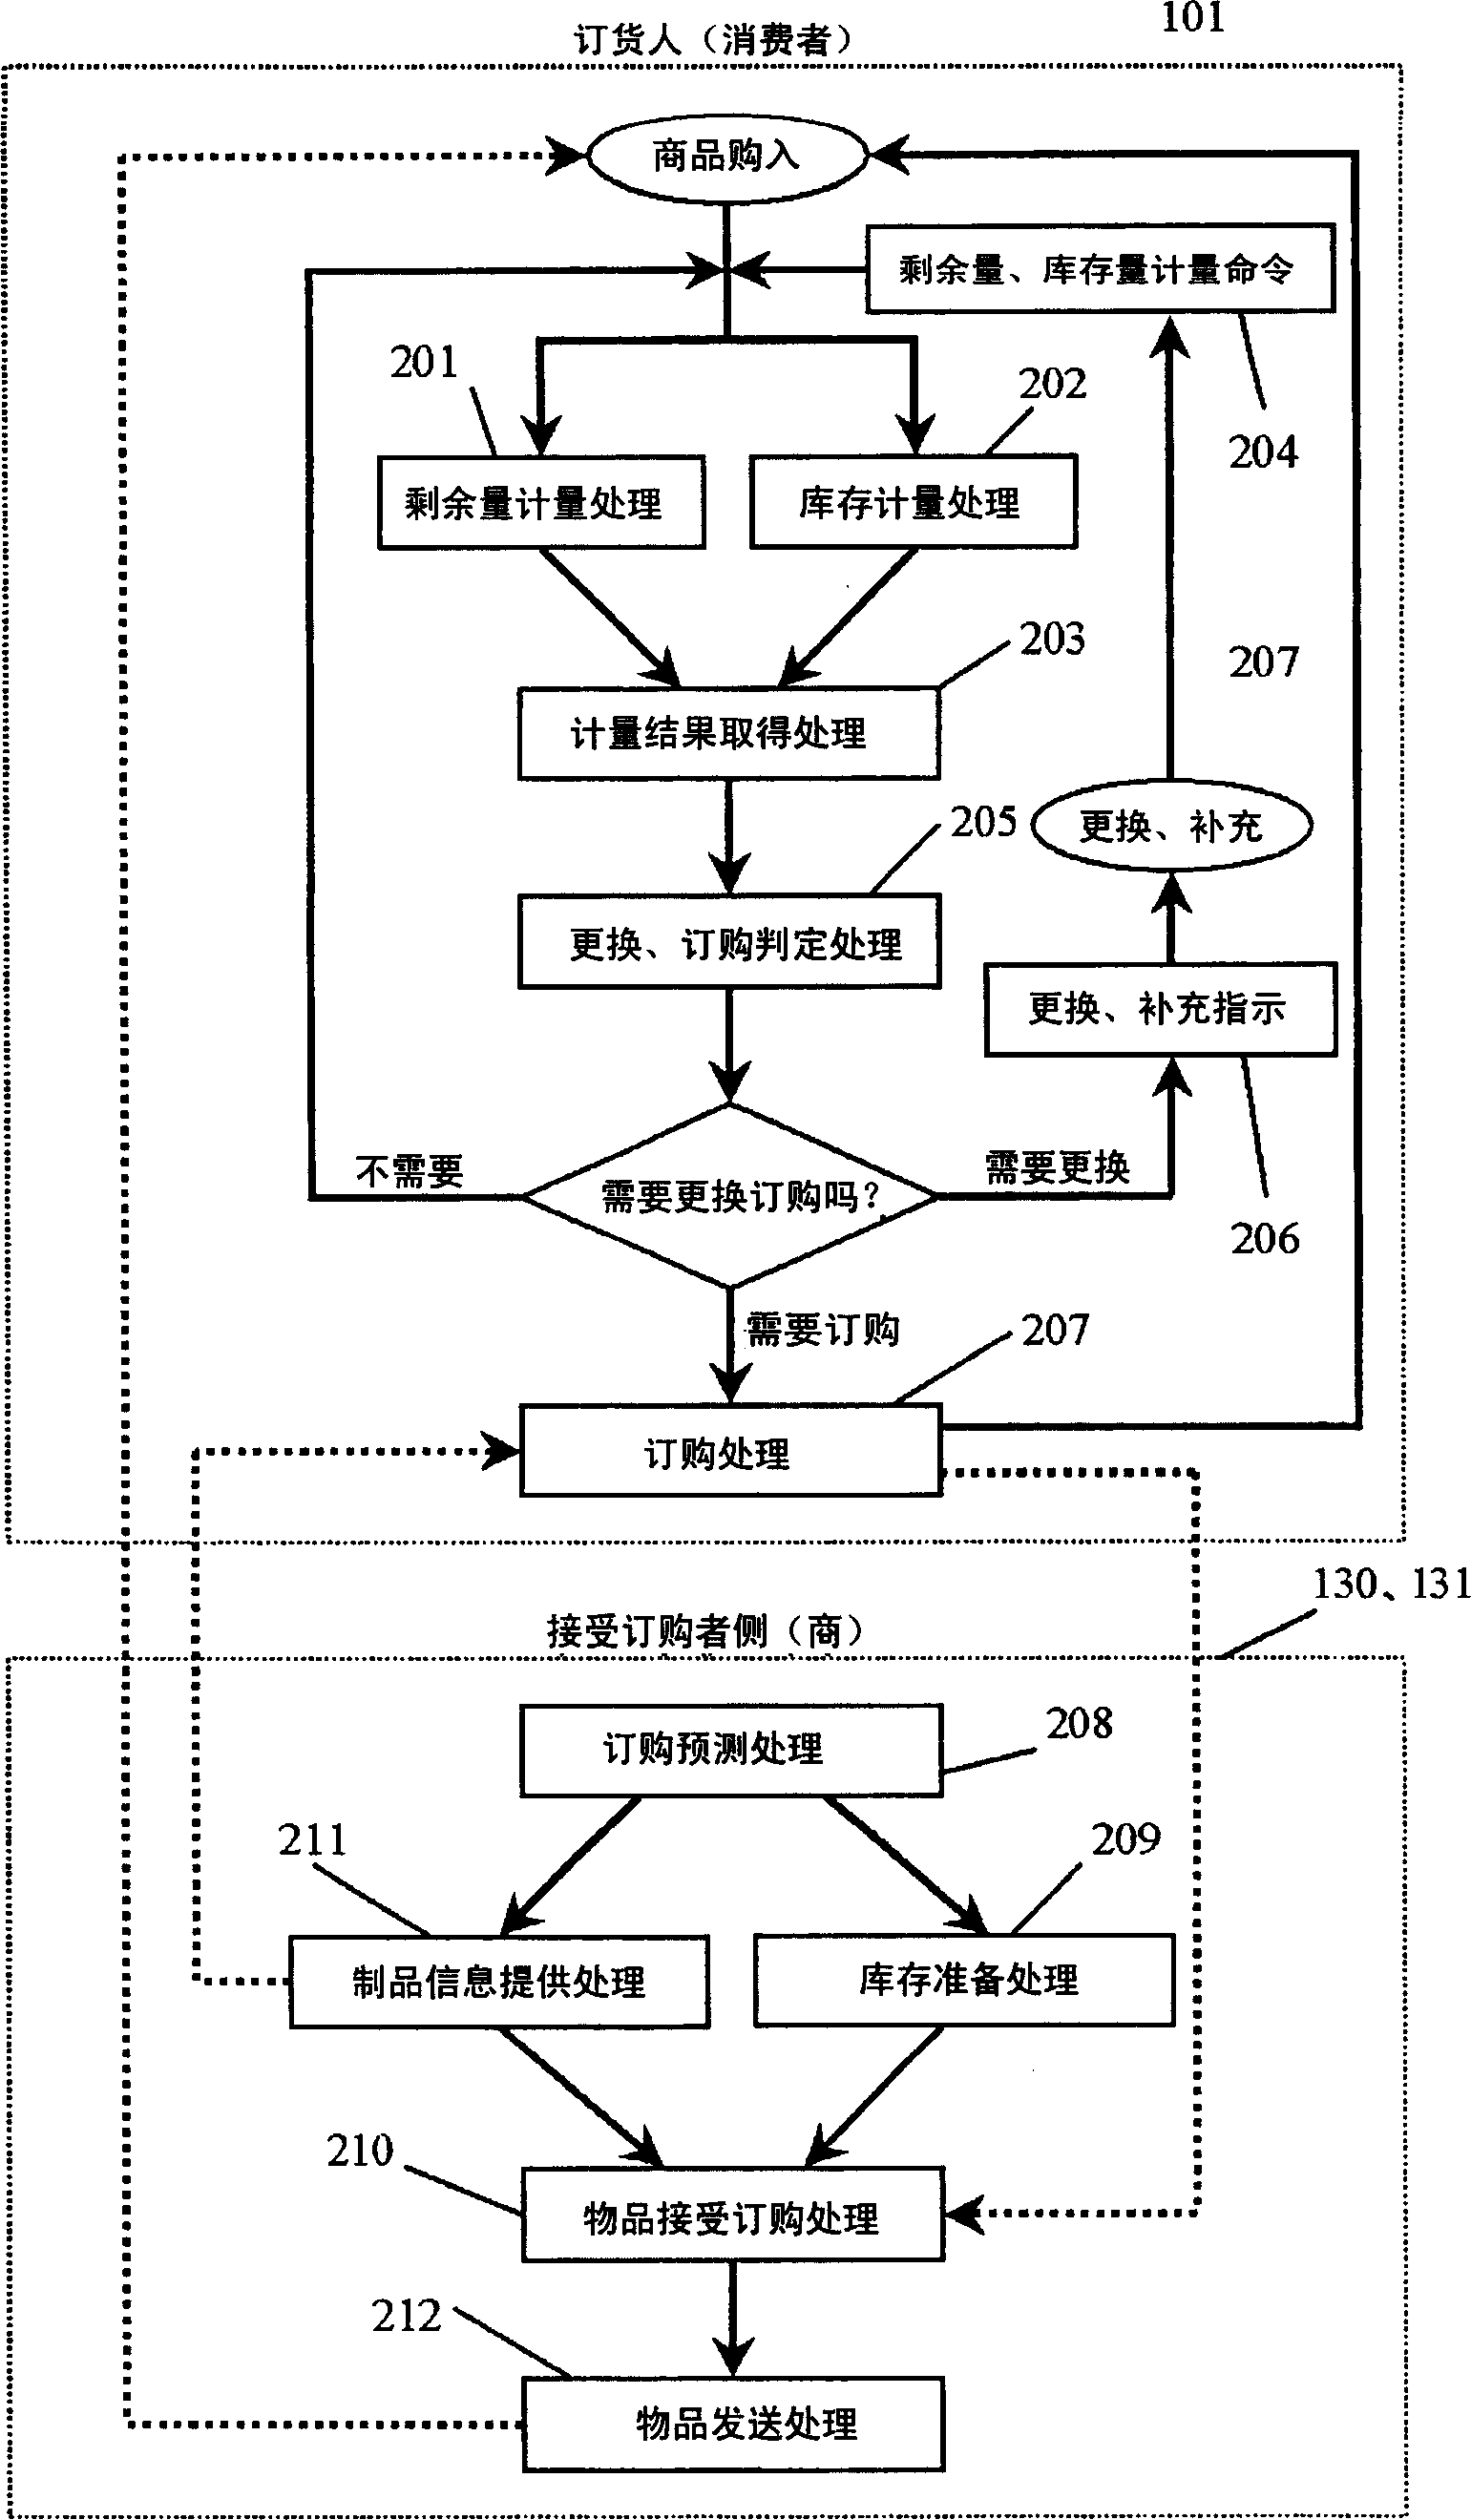 Inventory management and ordering system, and ordering management system using the previous system